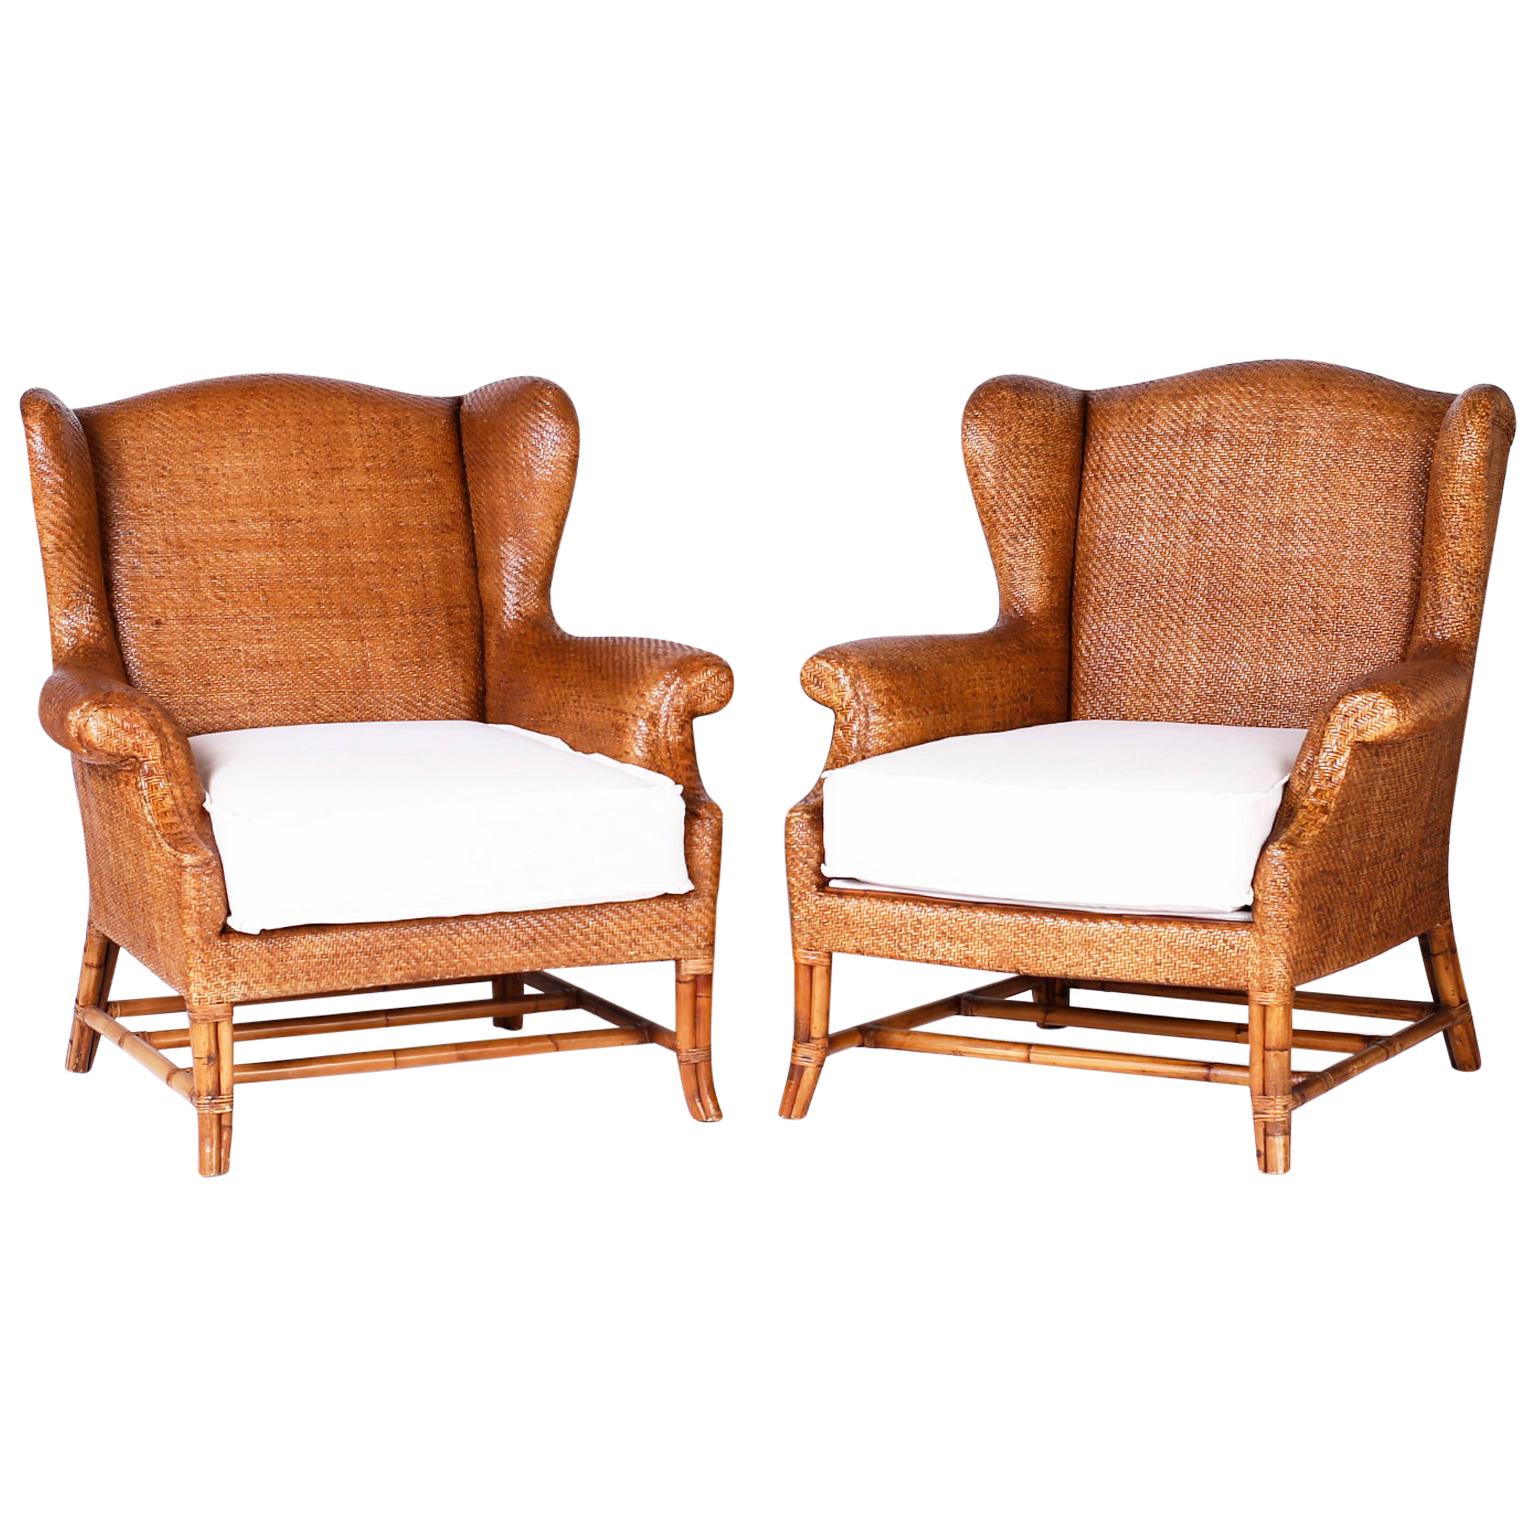 Pair of British Colonial Wicker and Bamboo Wing Chairs by Baker